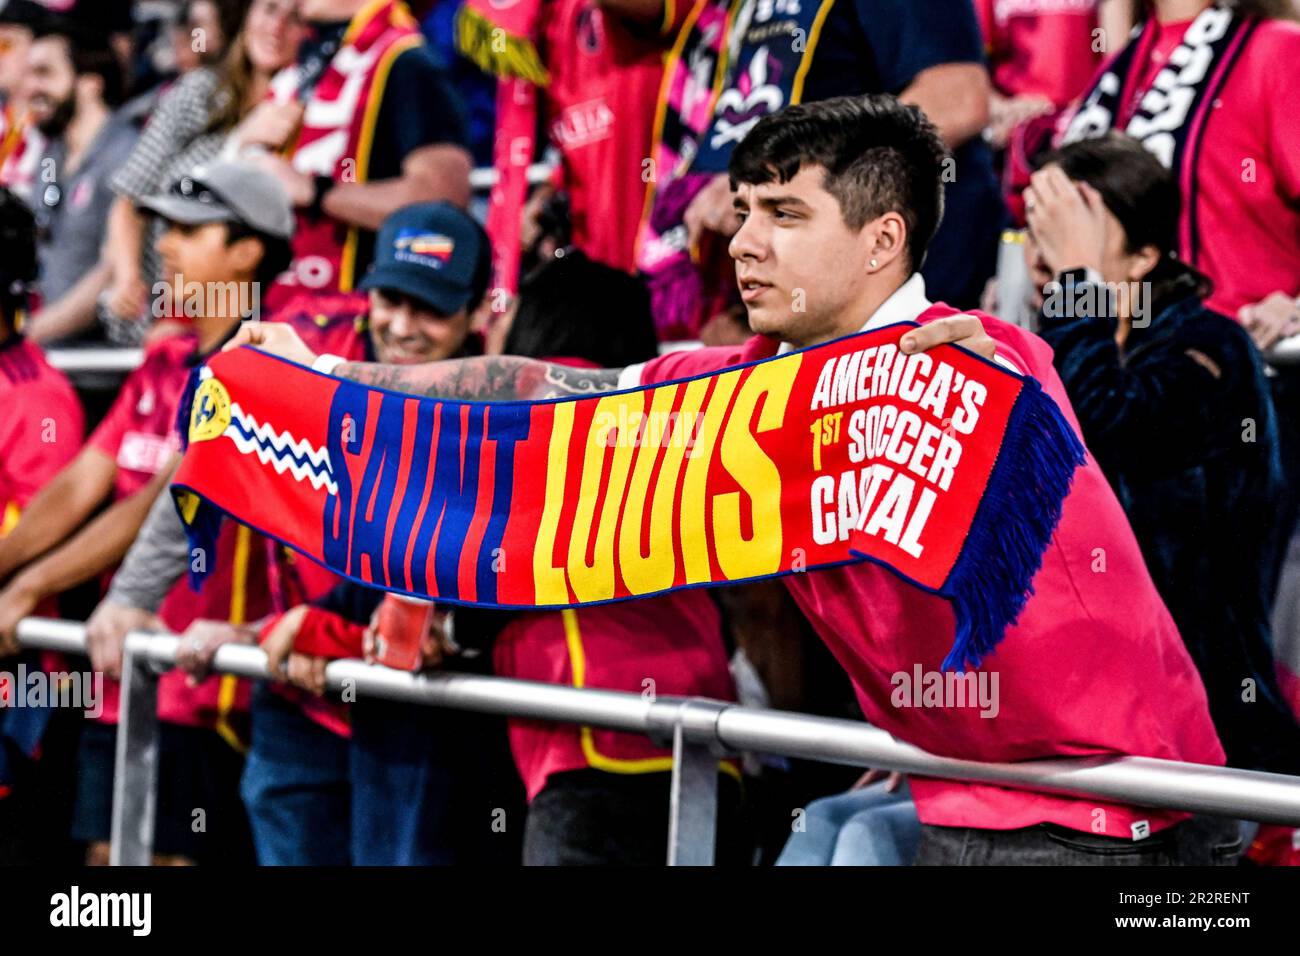 ST. LOUIS, MO - MAY 20: A fan holds up a scarf towards the Sporting Kansas  City players saying that St. Louis is America's first soccer capital during  a game between Sporting